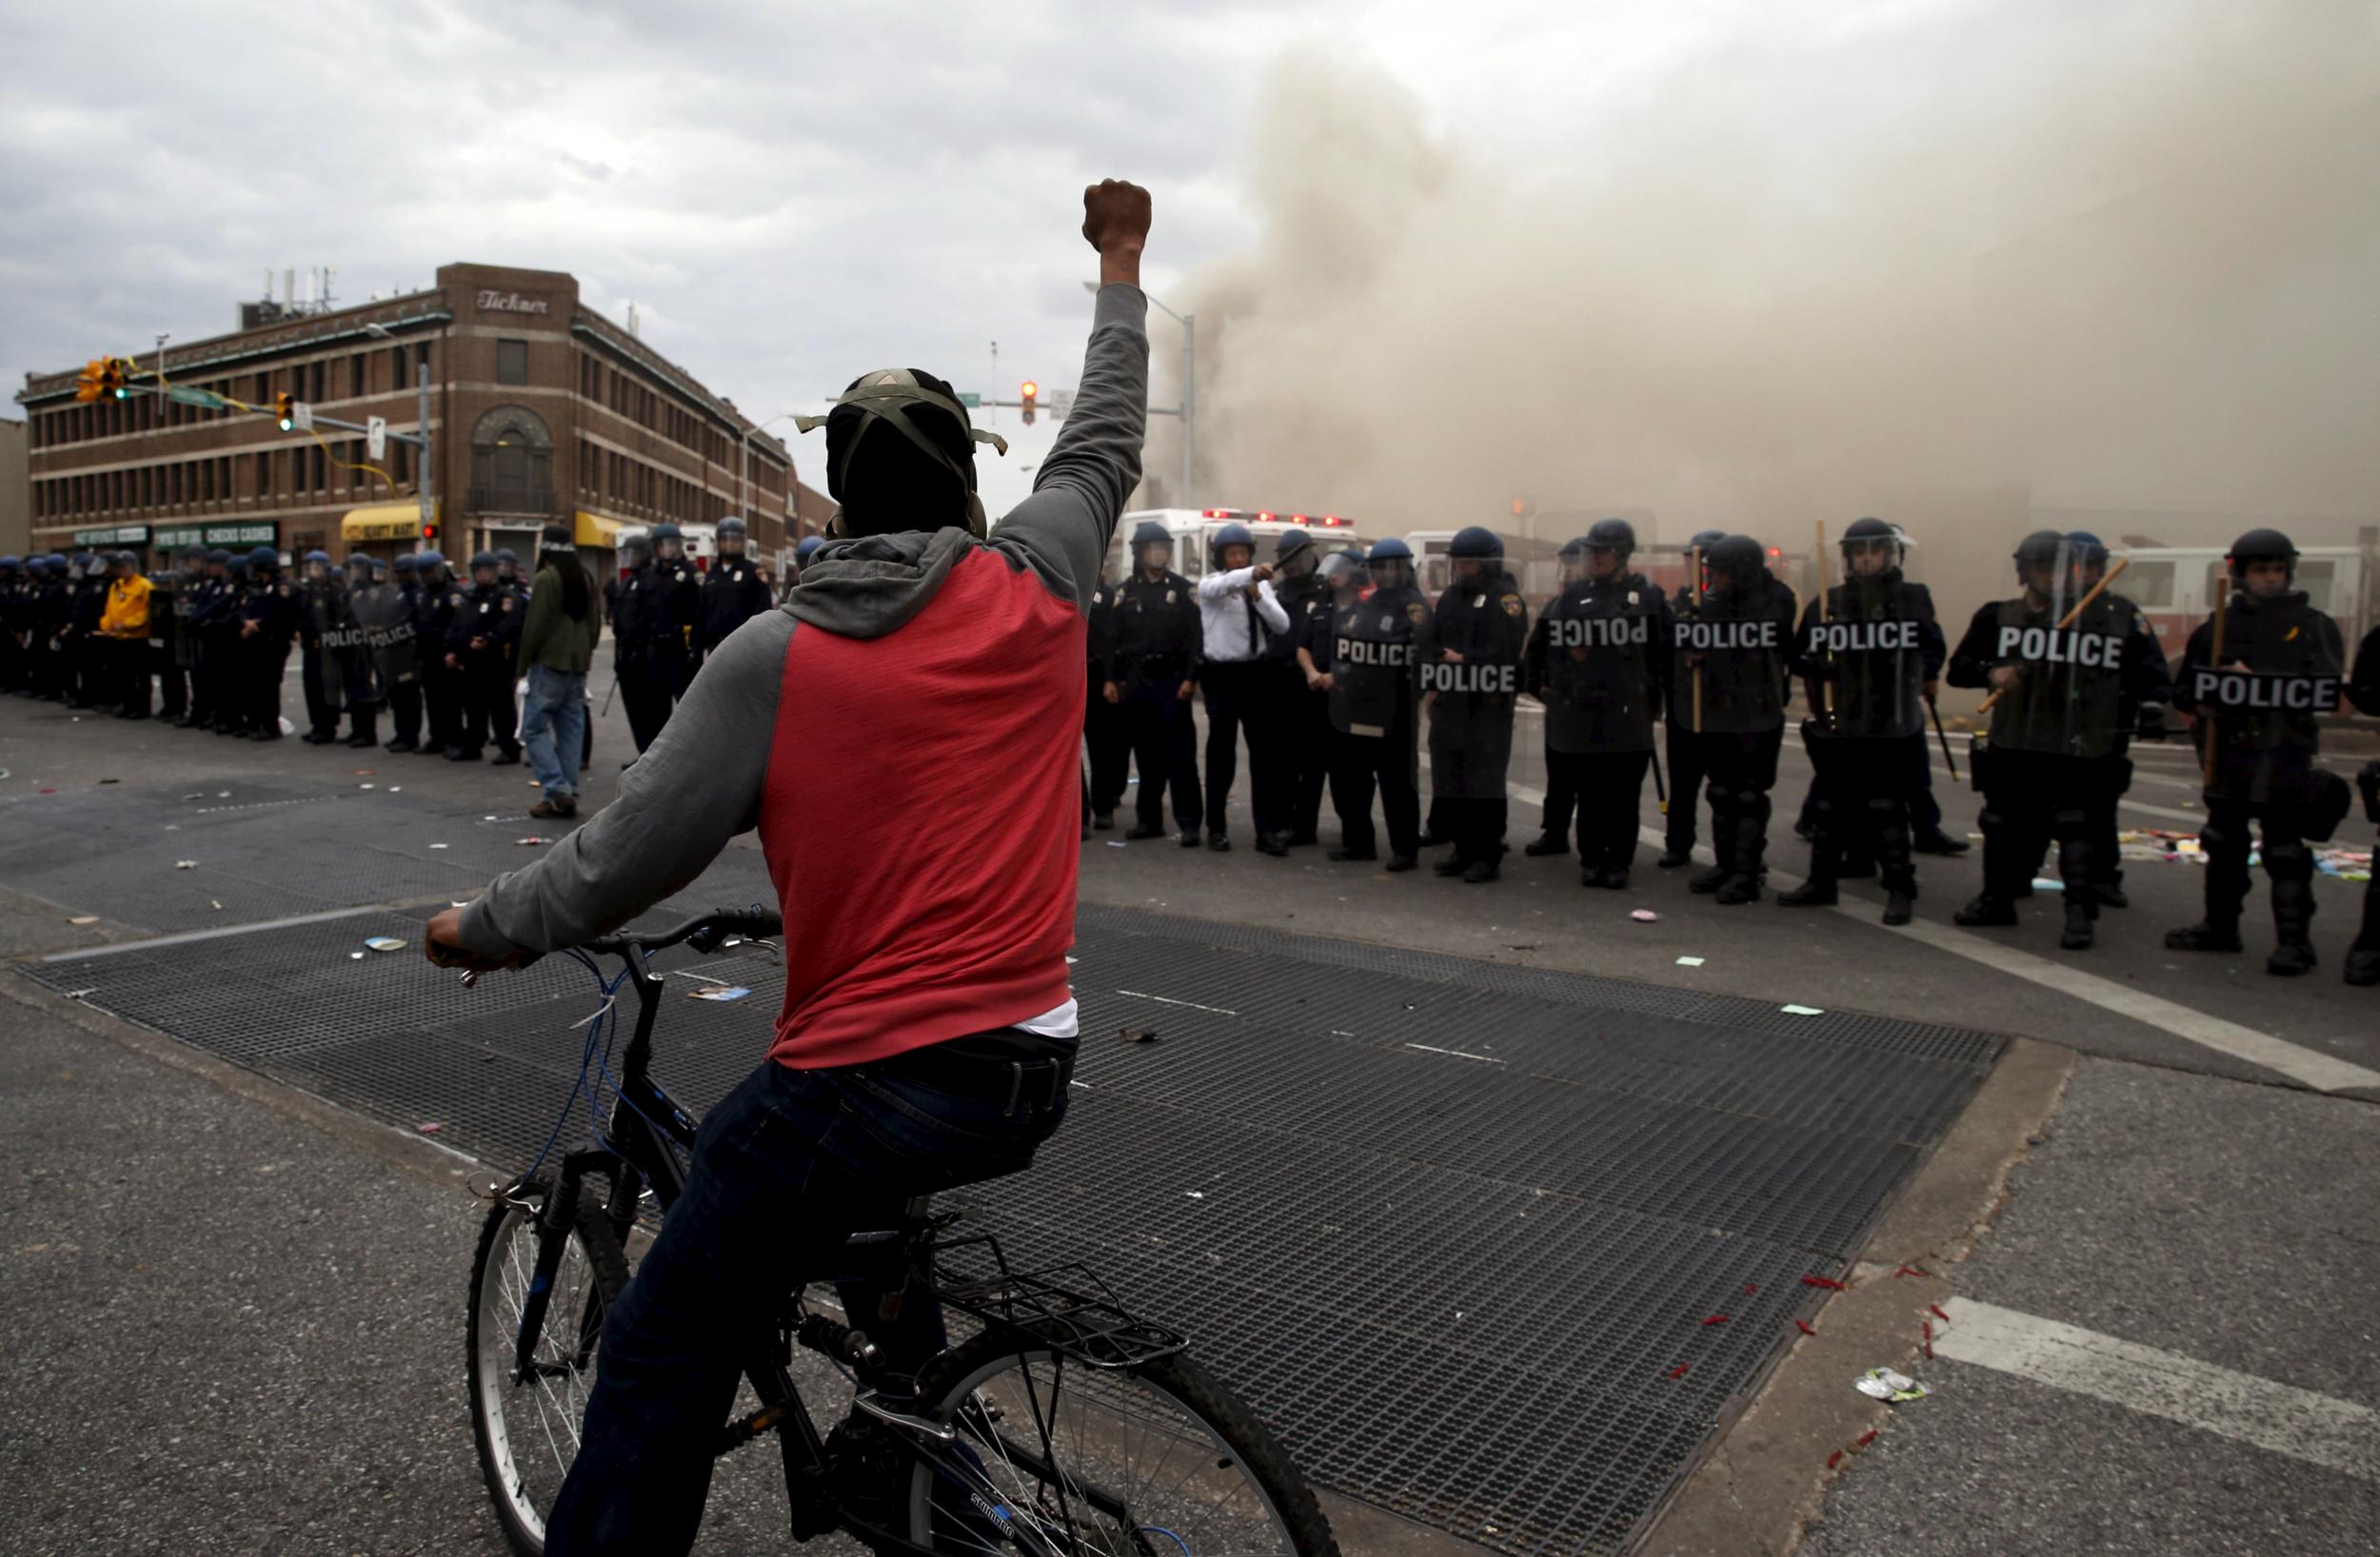 Powerful Photos From The Baltimore Riots